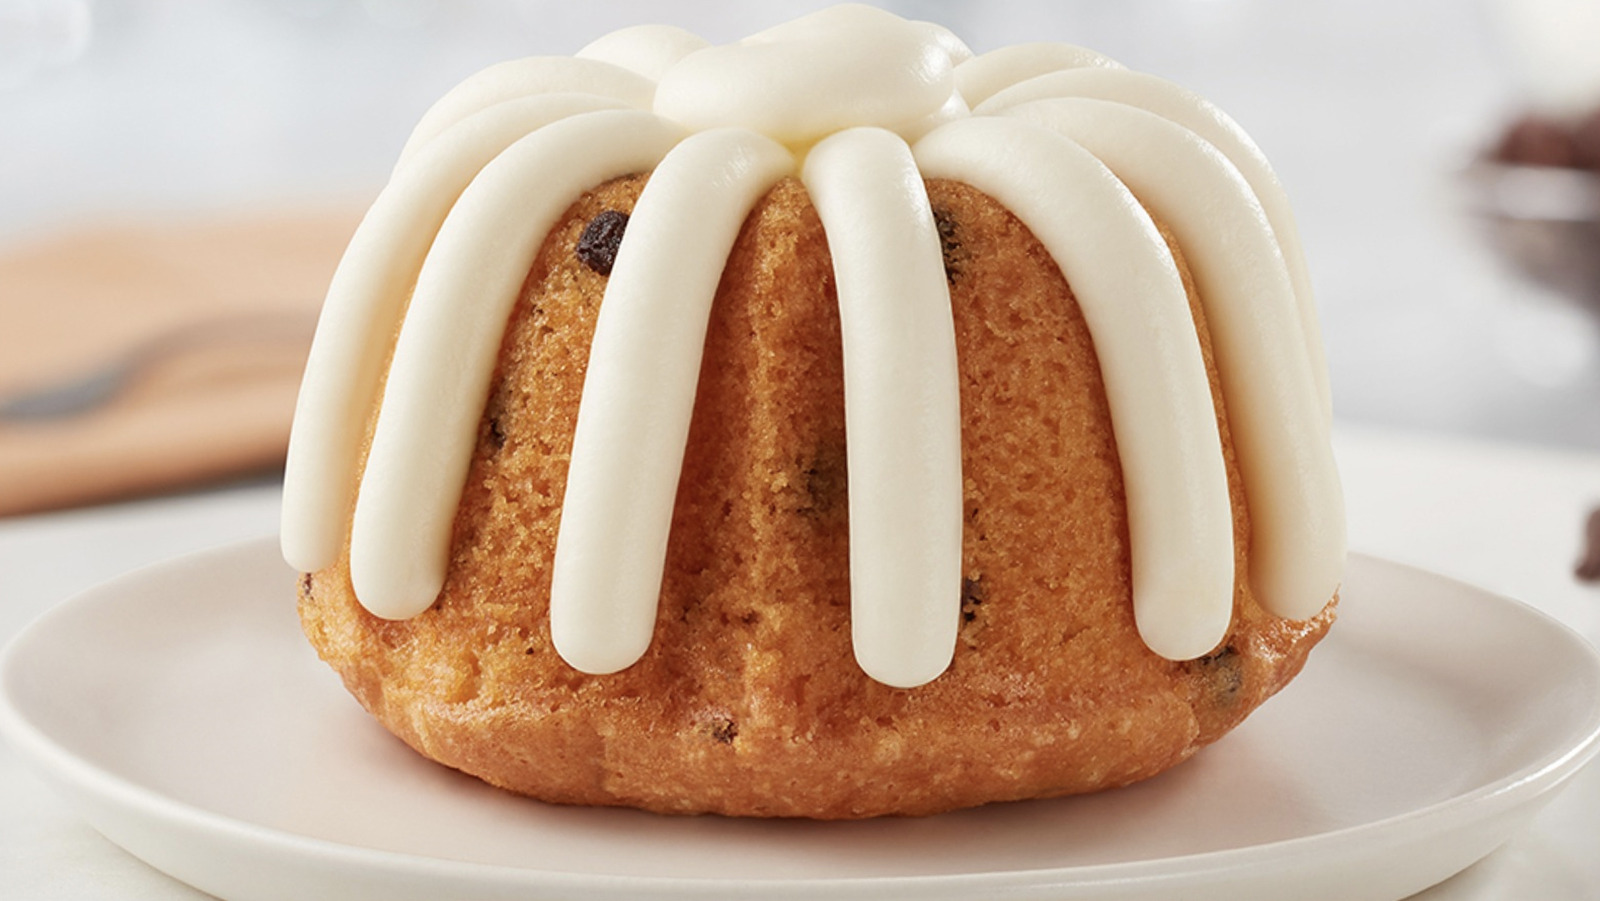 https://www.mashed.com/img/gallery/the-three-store-bought-ingredients-that-make-copycat-nothing-bundt-cakes-a-breeze-to-make/l-intro-1678996193.jpg